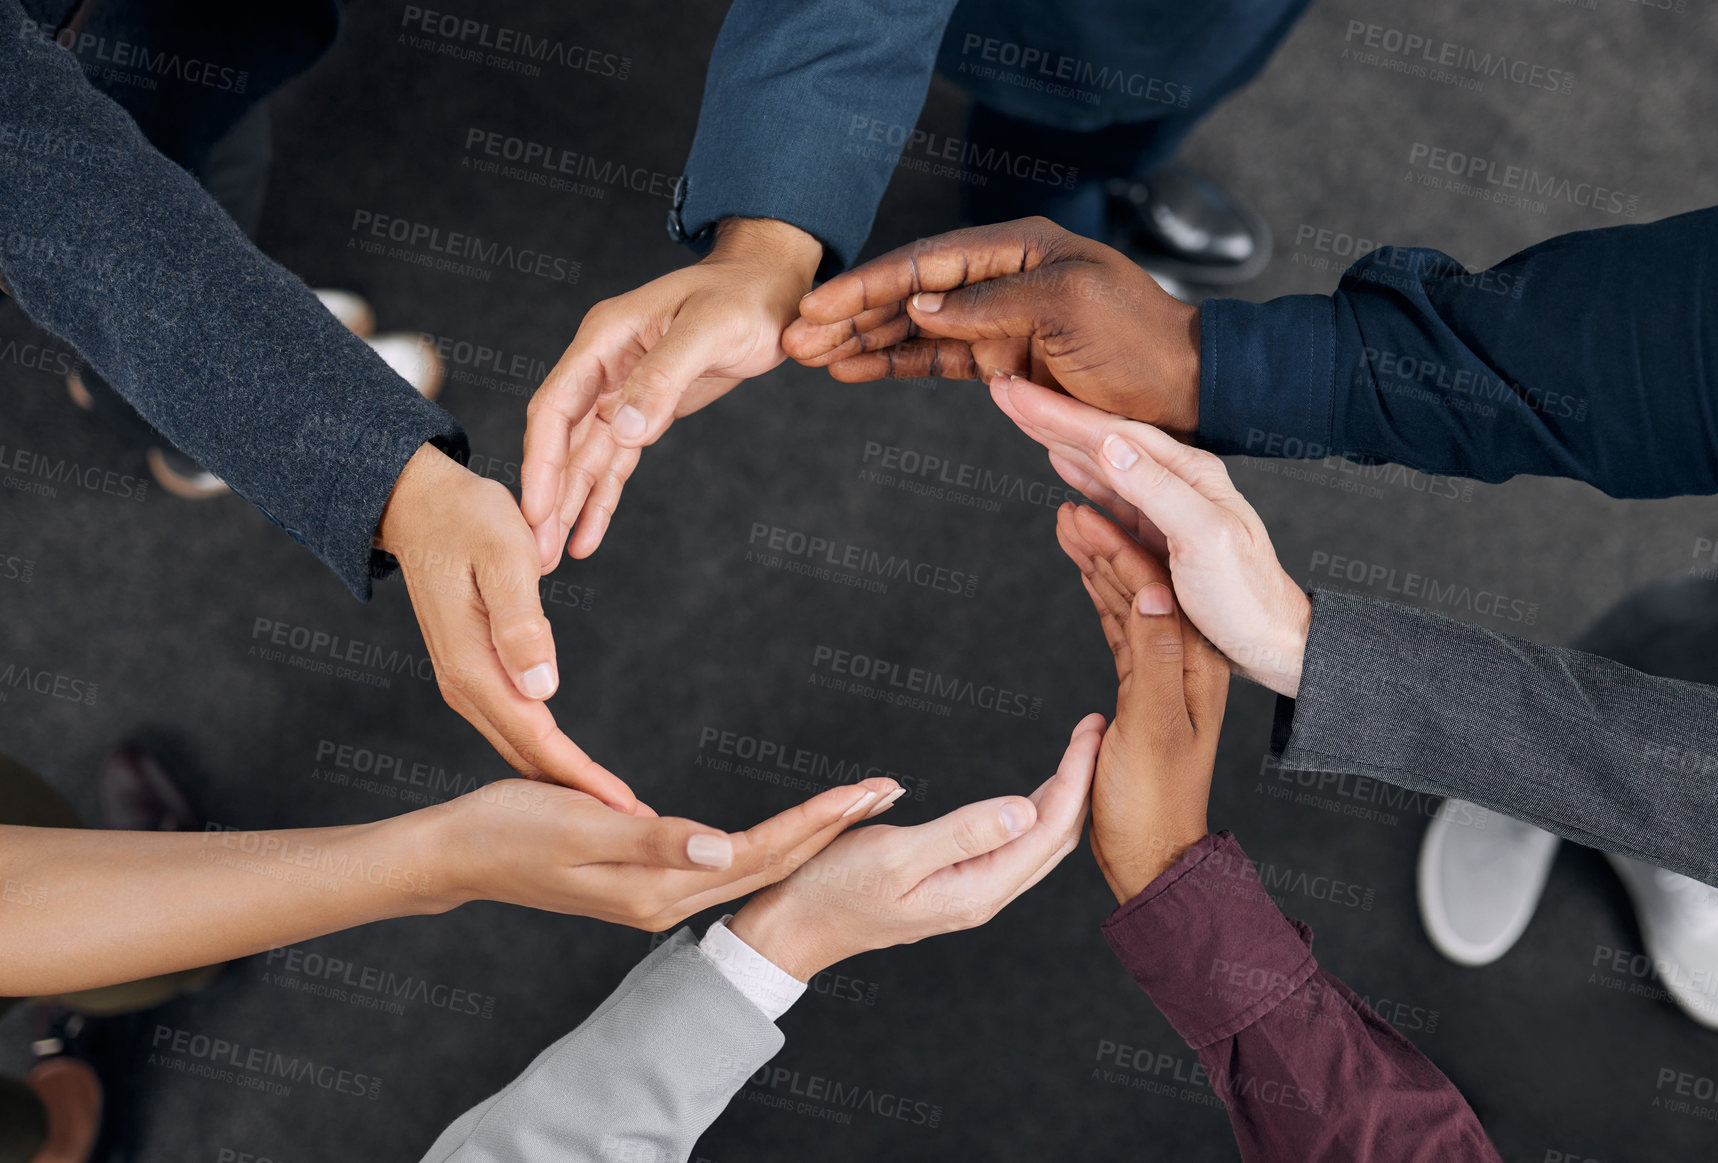 Buy stock photo Shot of a group of businesspeople with their hands joined together to form a circle